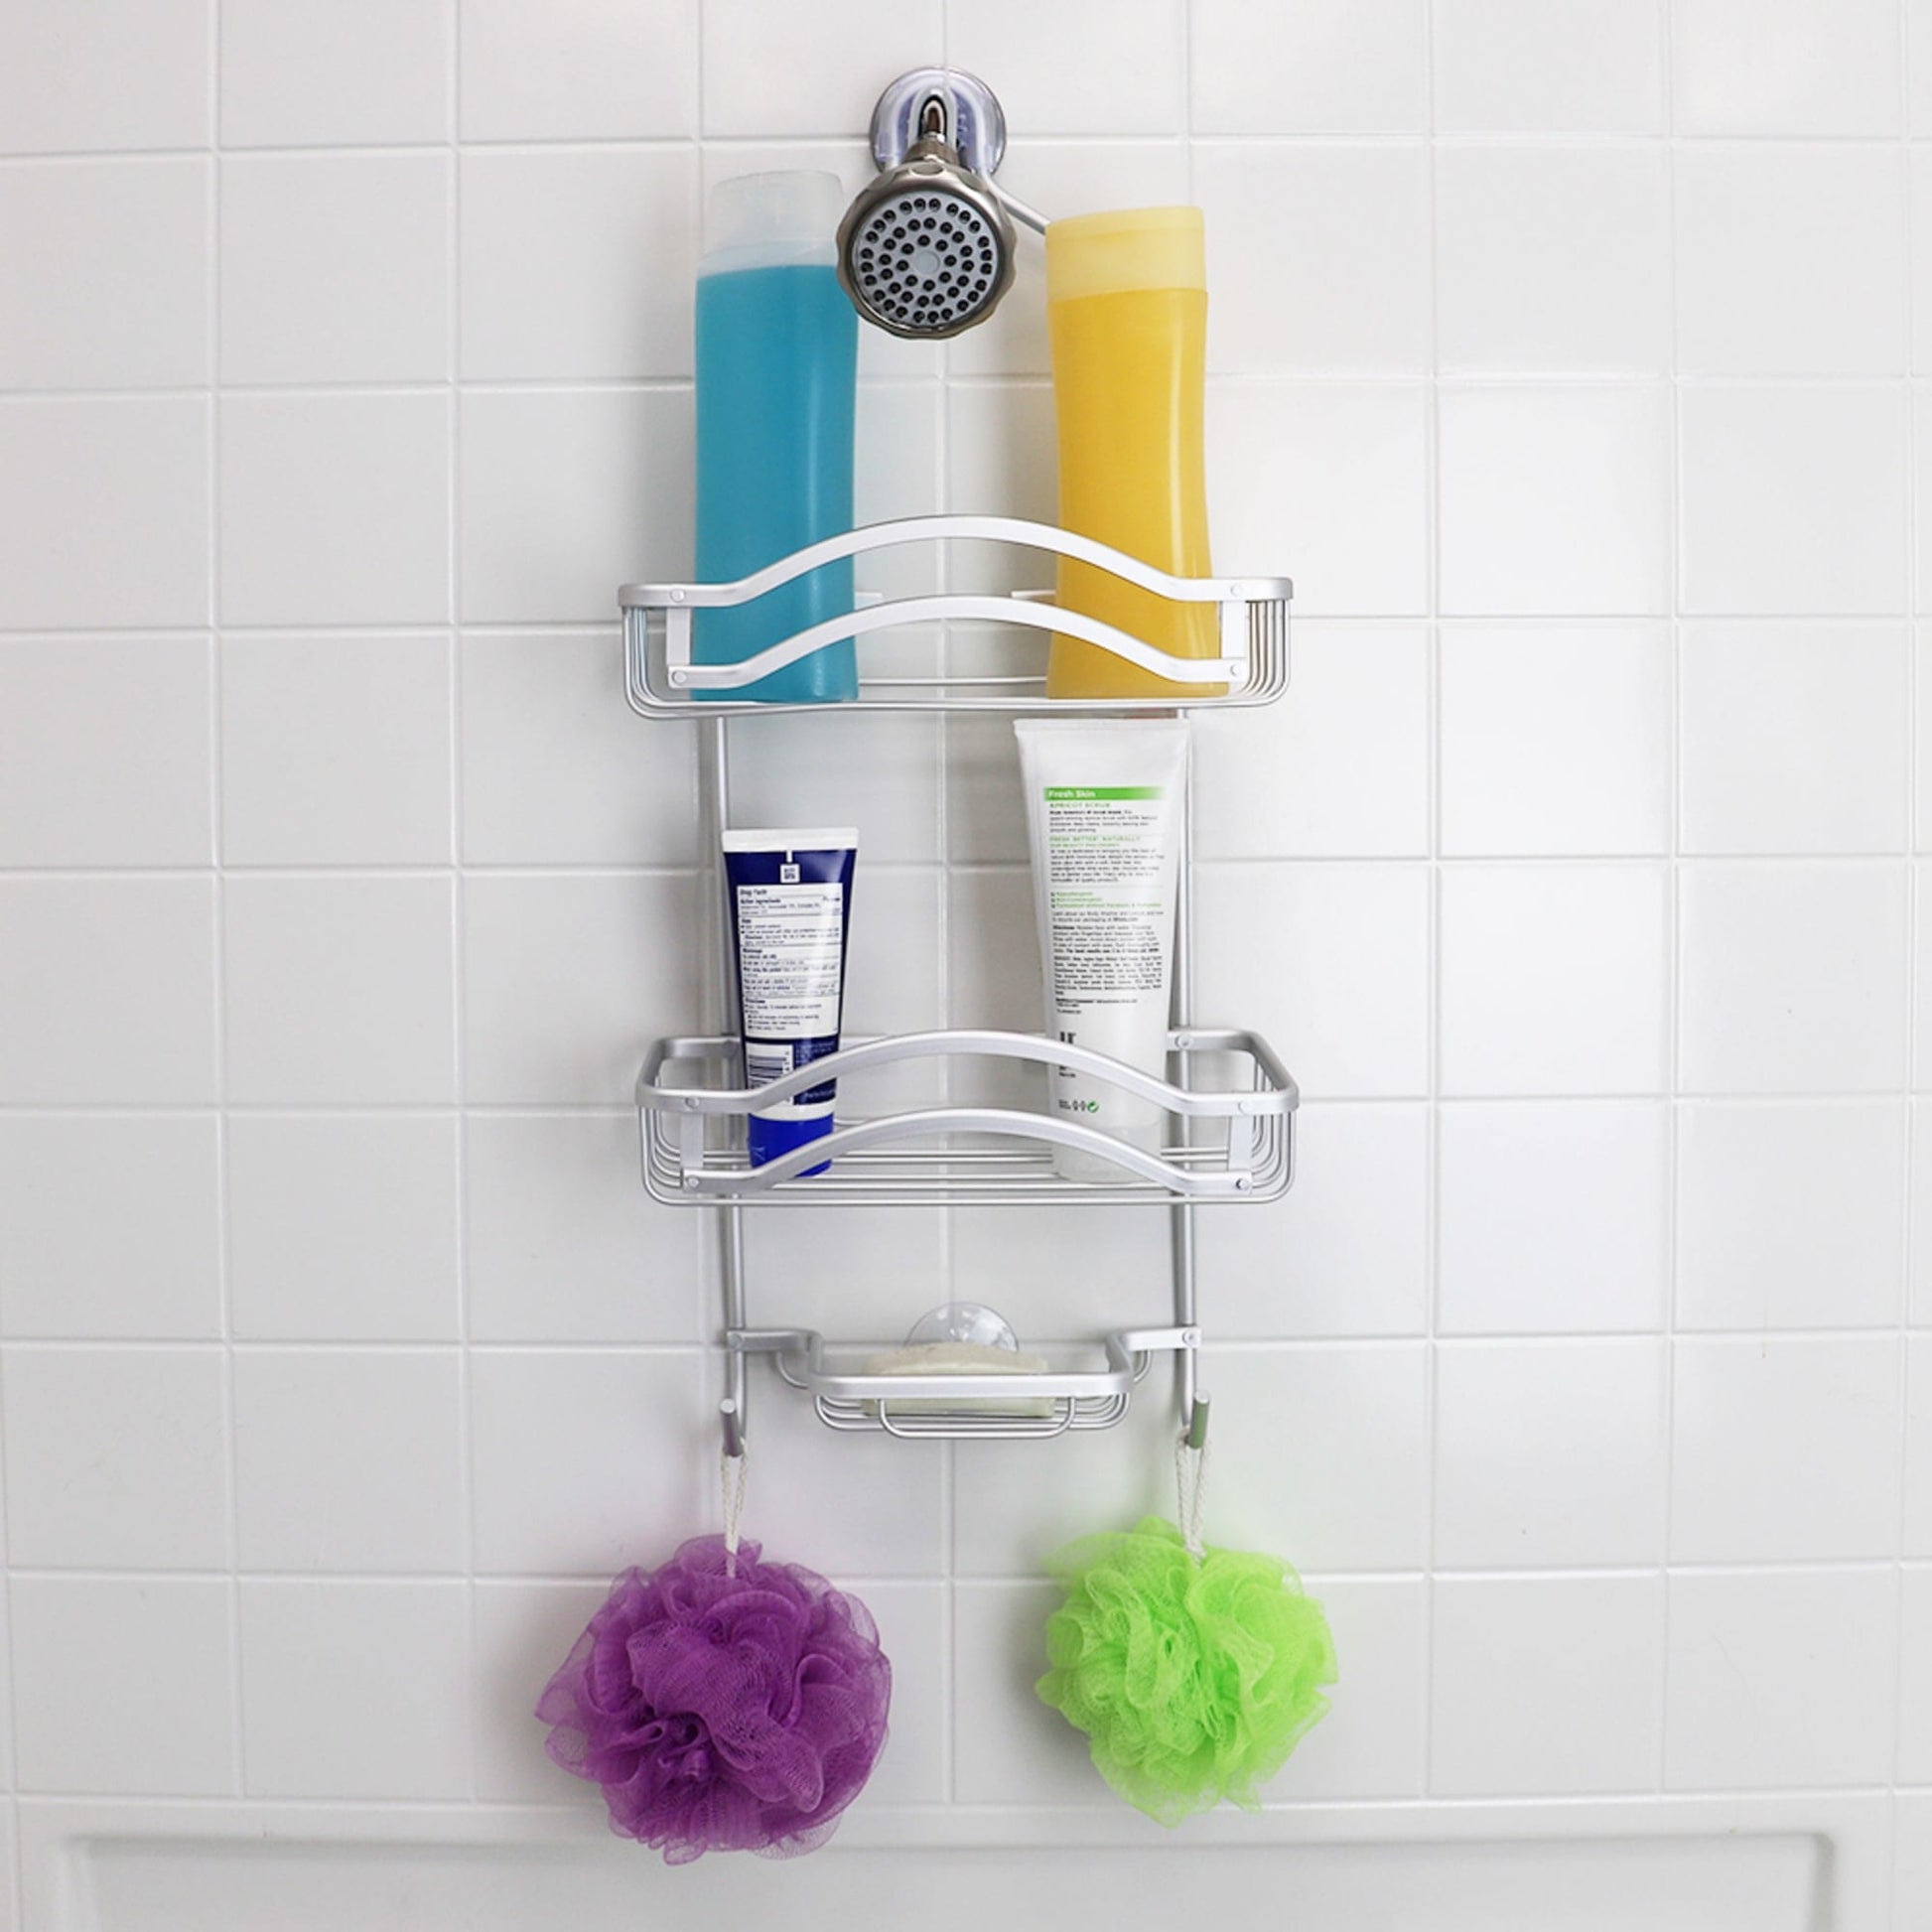 Home Basics 2 Tier Perforated Plastic Shower Caddy with Suction